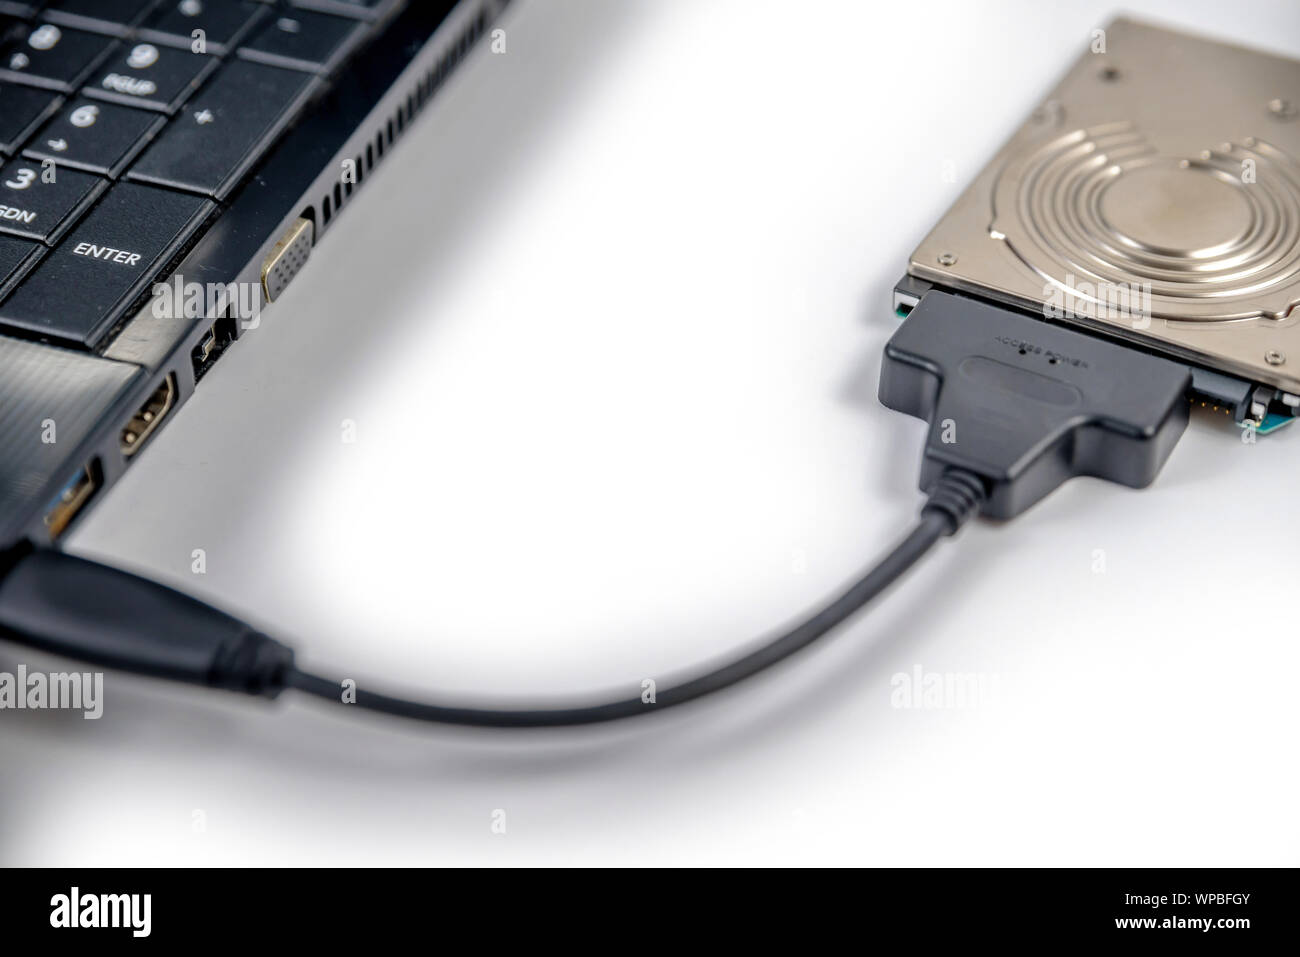 hdd 2.5 internal hard drive disk connected to laptop via sata usb cable  closeup view Stock Photo - Alamy